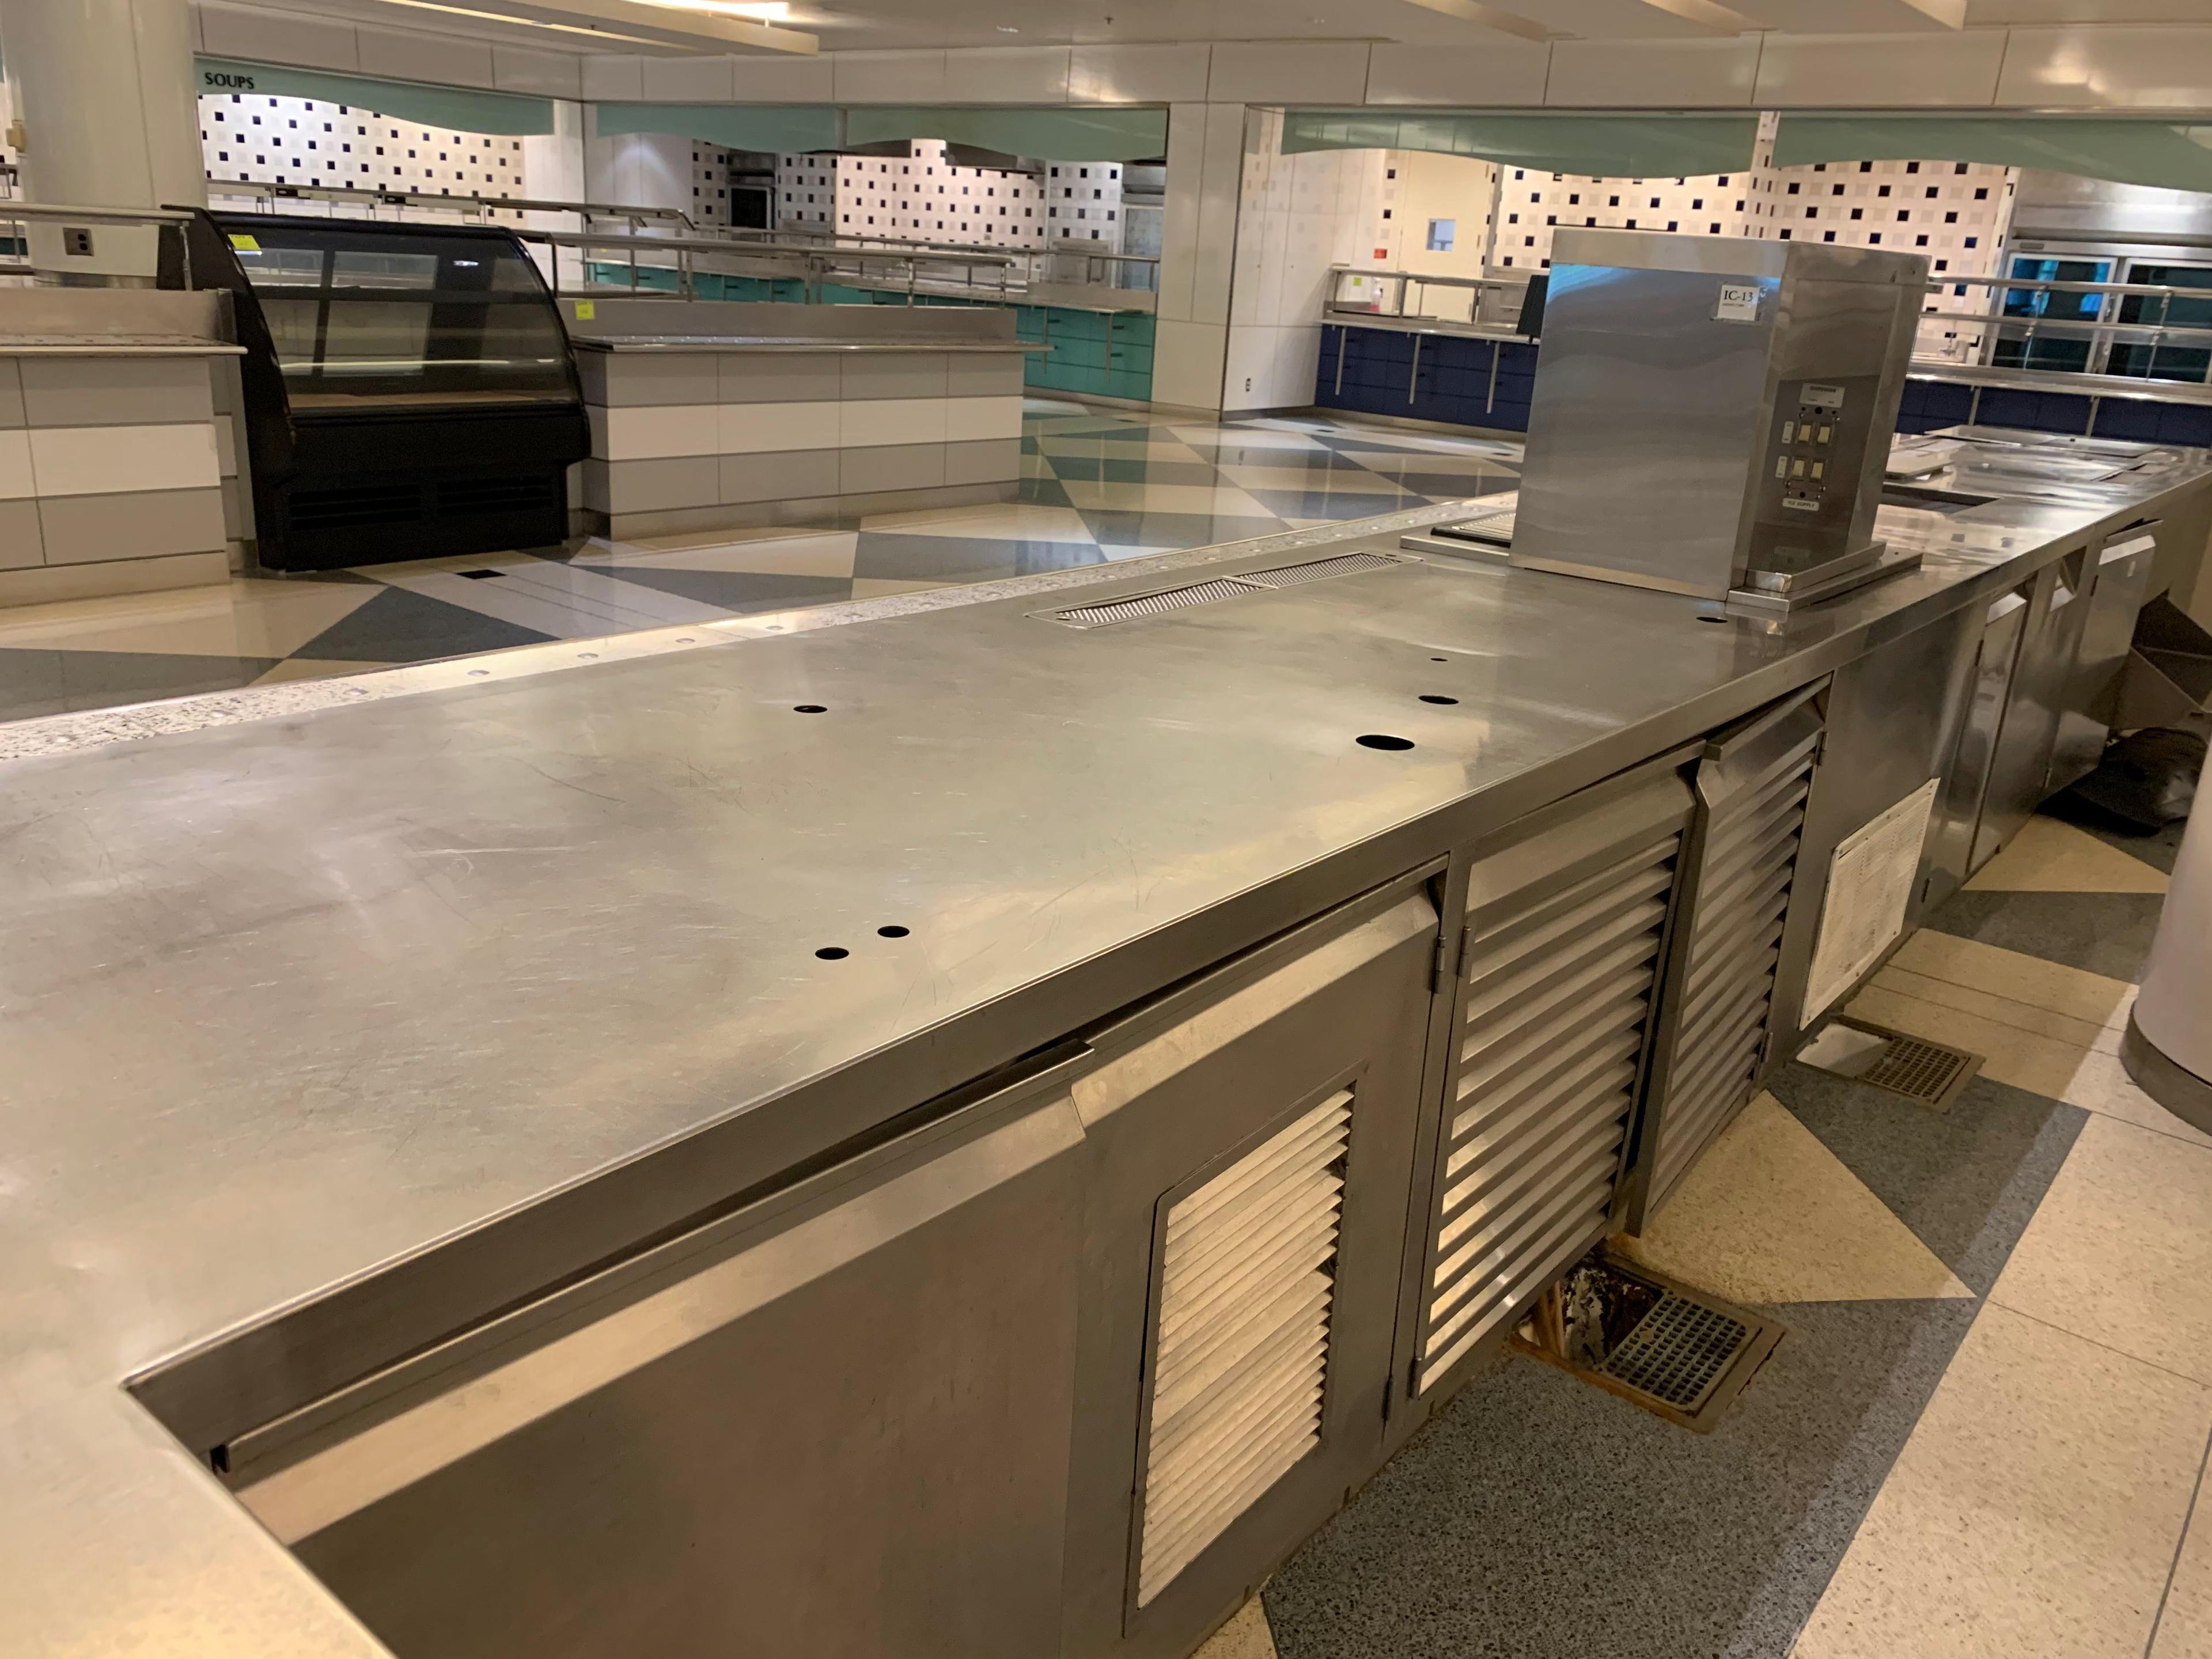 24'5" CAFETERIA COUNTER FOR BEVERAGES, SODA FOUNTAIN WITH ICE MAKER